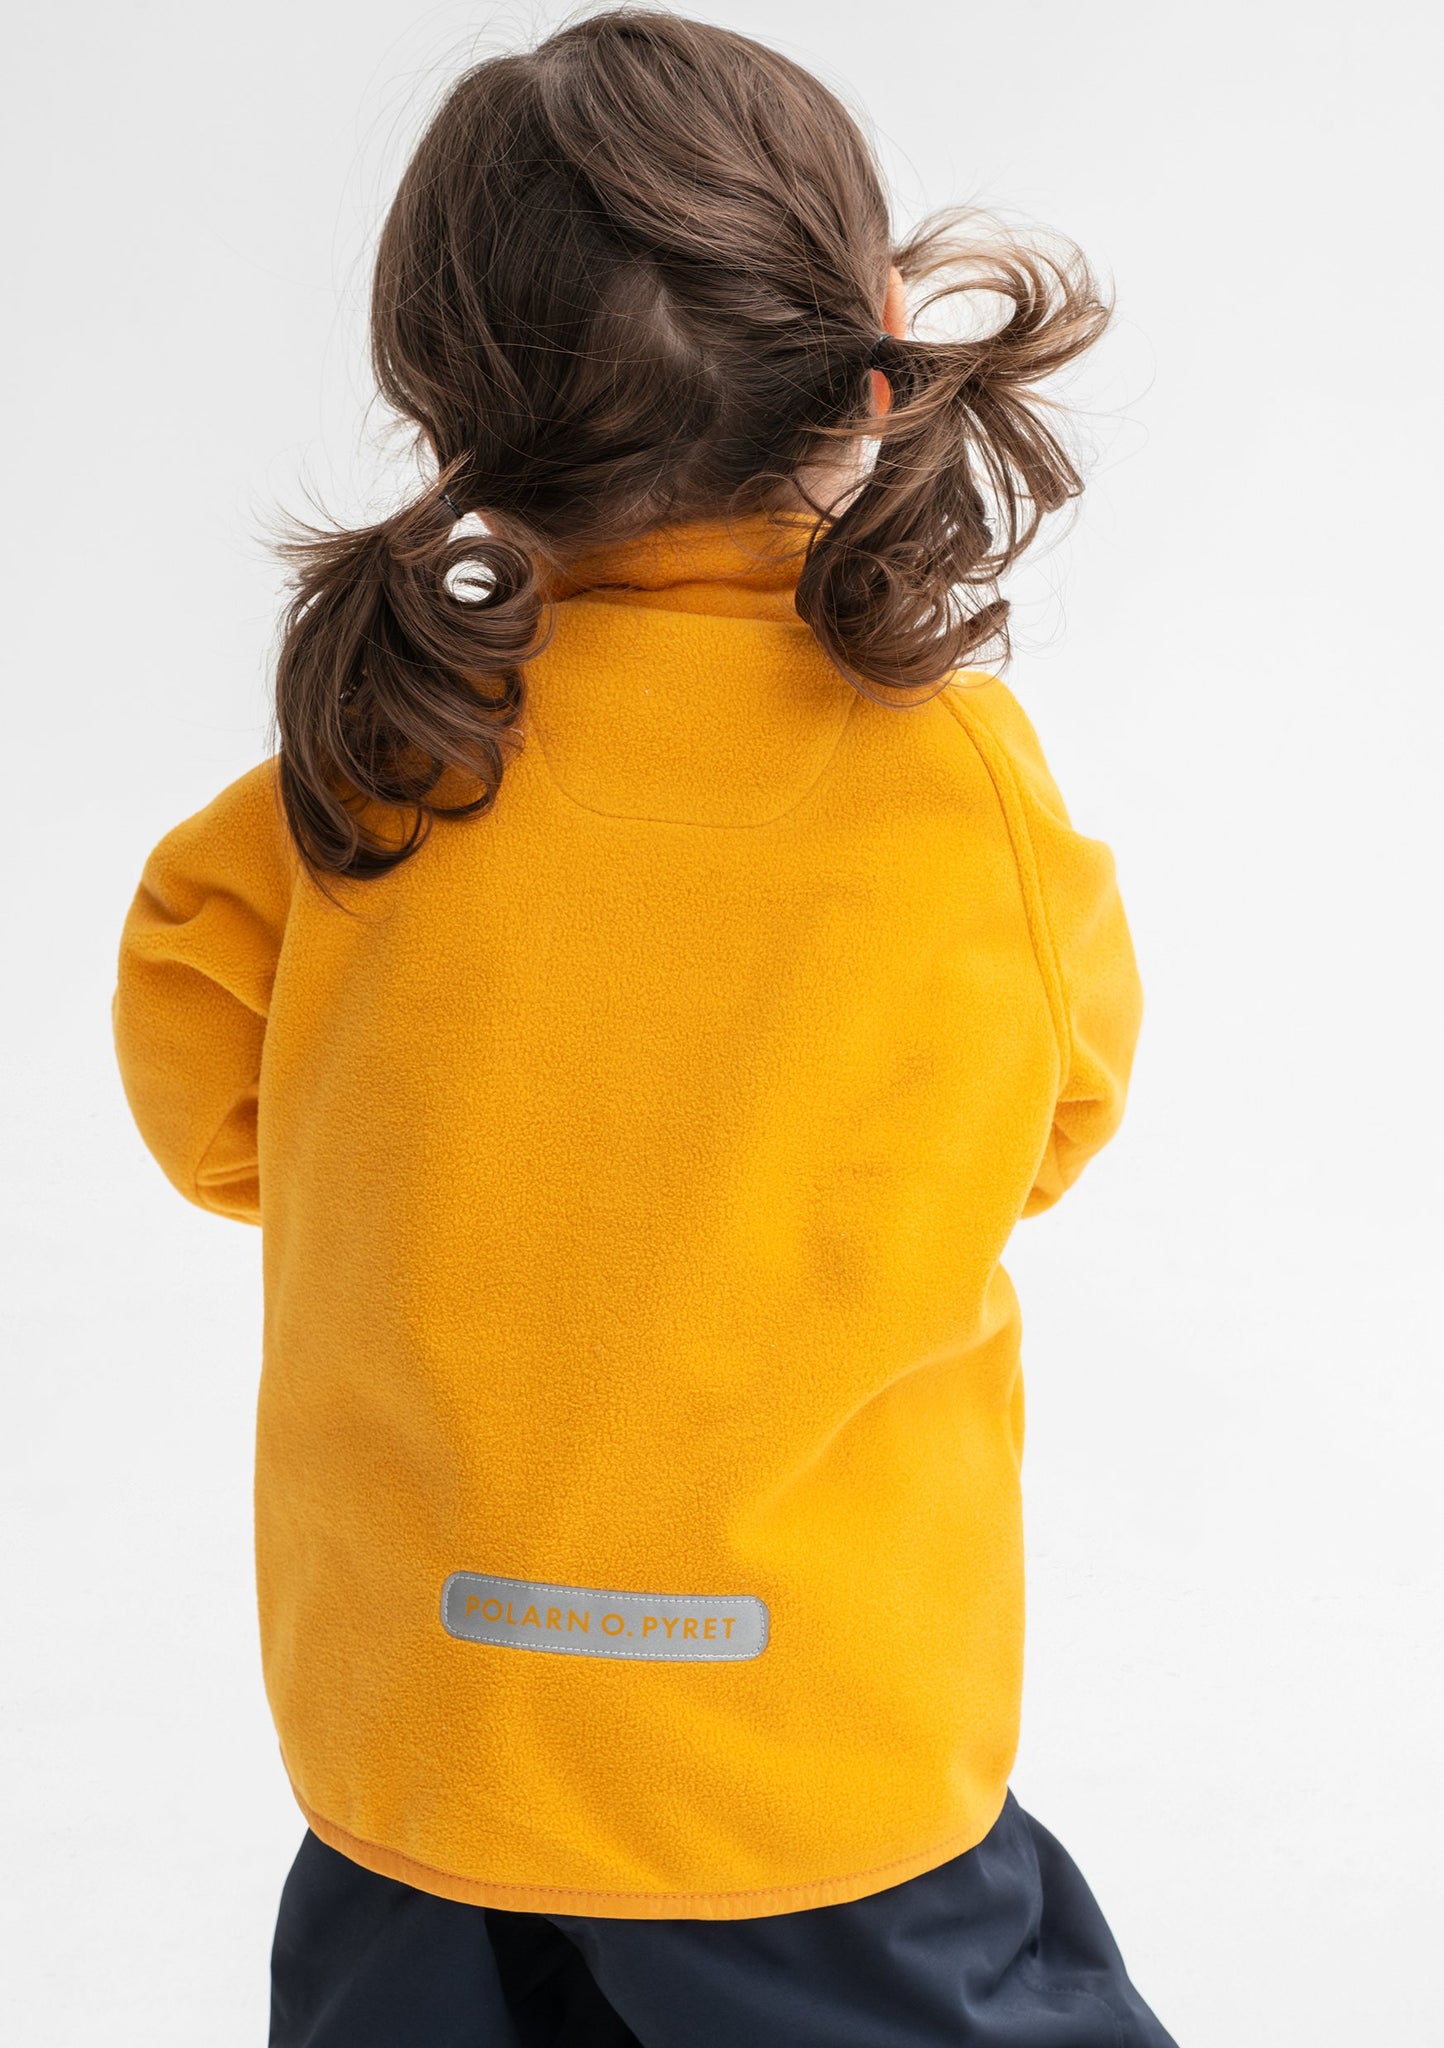 Back view of a young girl wearing a yellow, kids waterproof fleece jacket with cuff thumbholes, made of lightweight fabric.